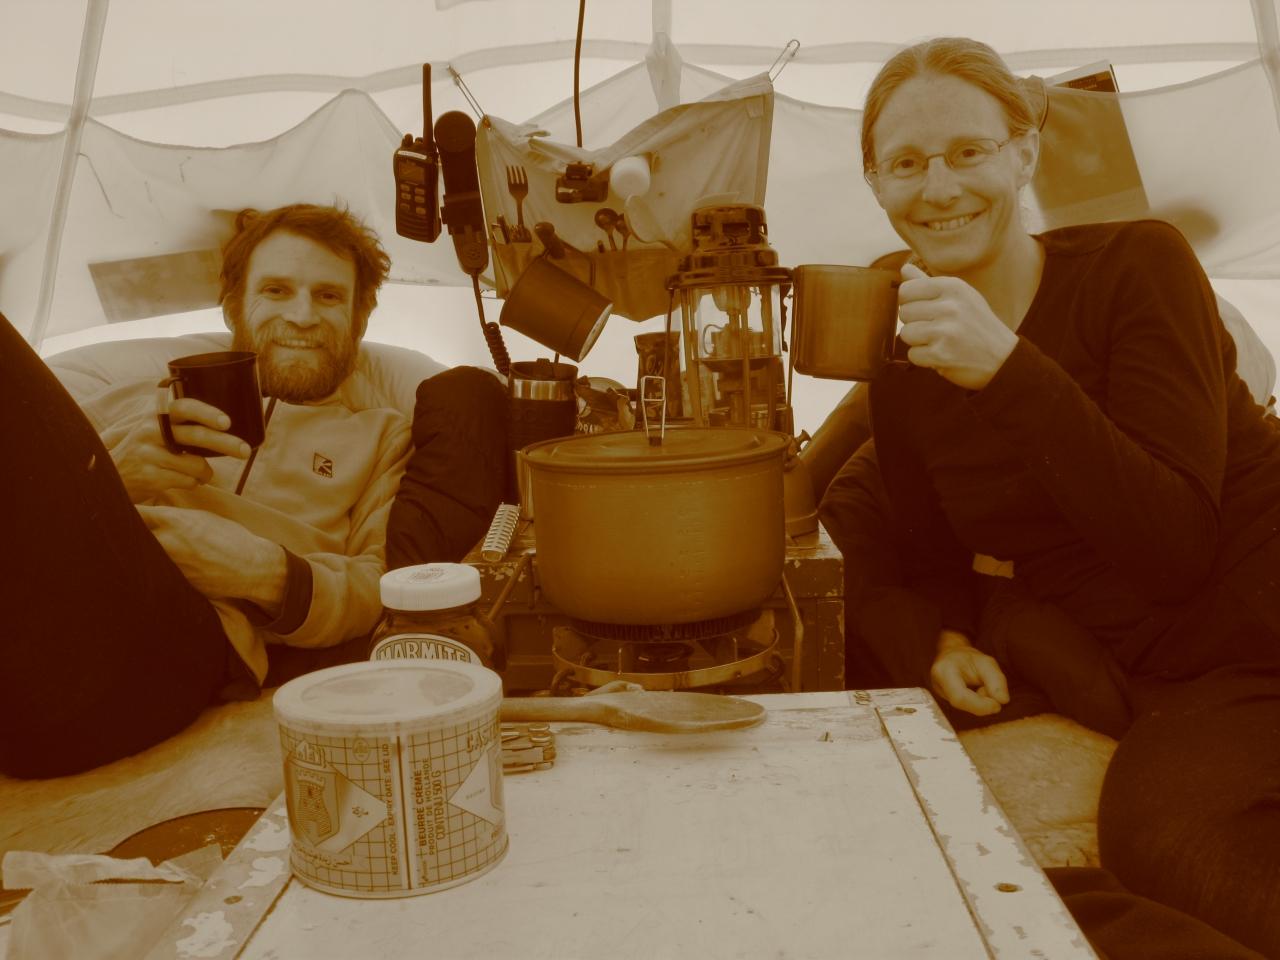 Two people in a tent smile and raise their mugs to the camera. A vintage effect filter gives the photo a brownish tint